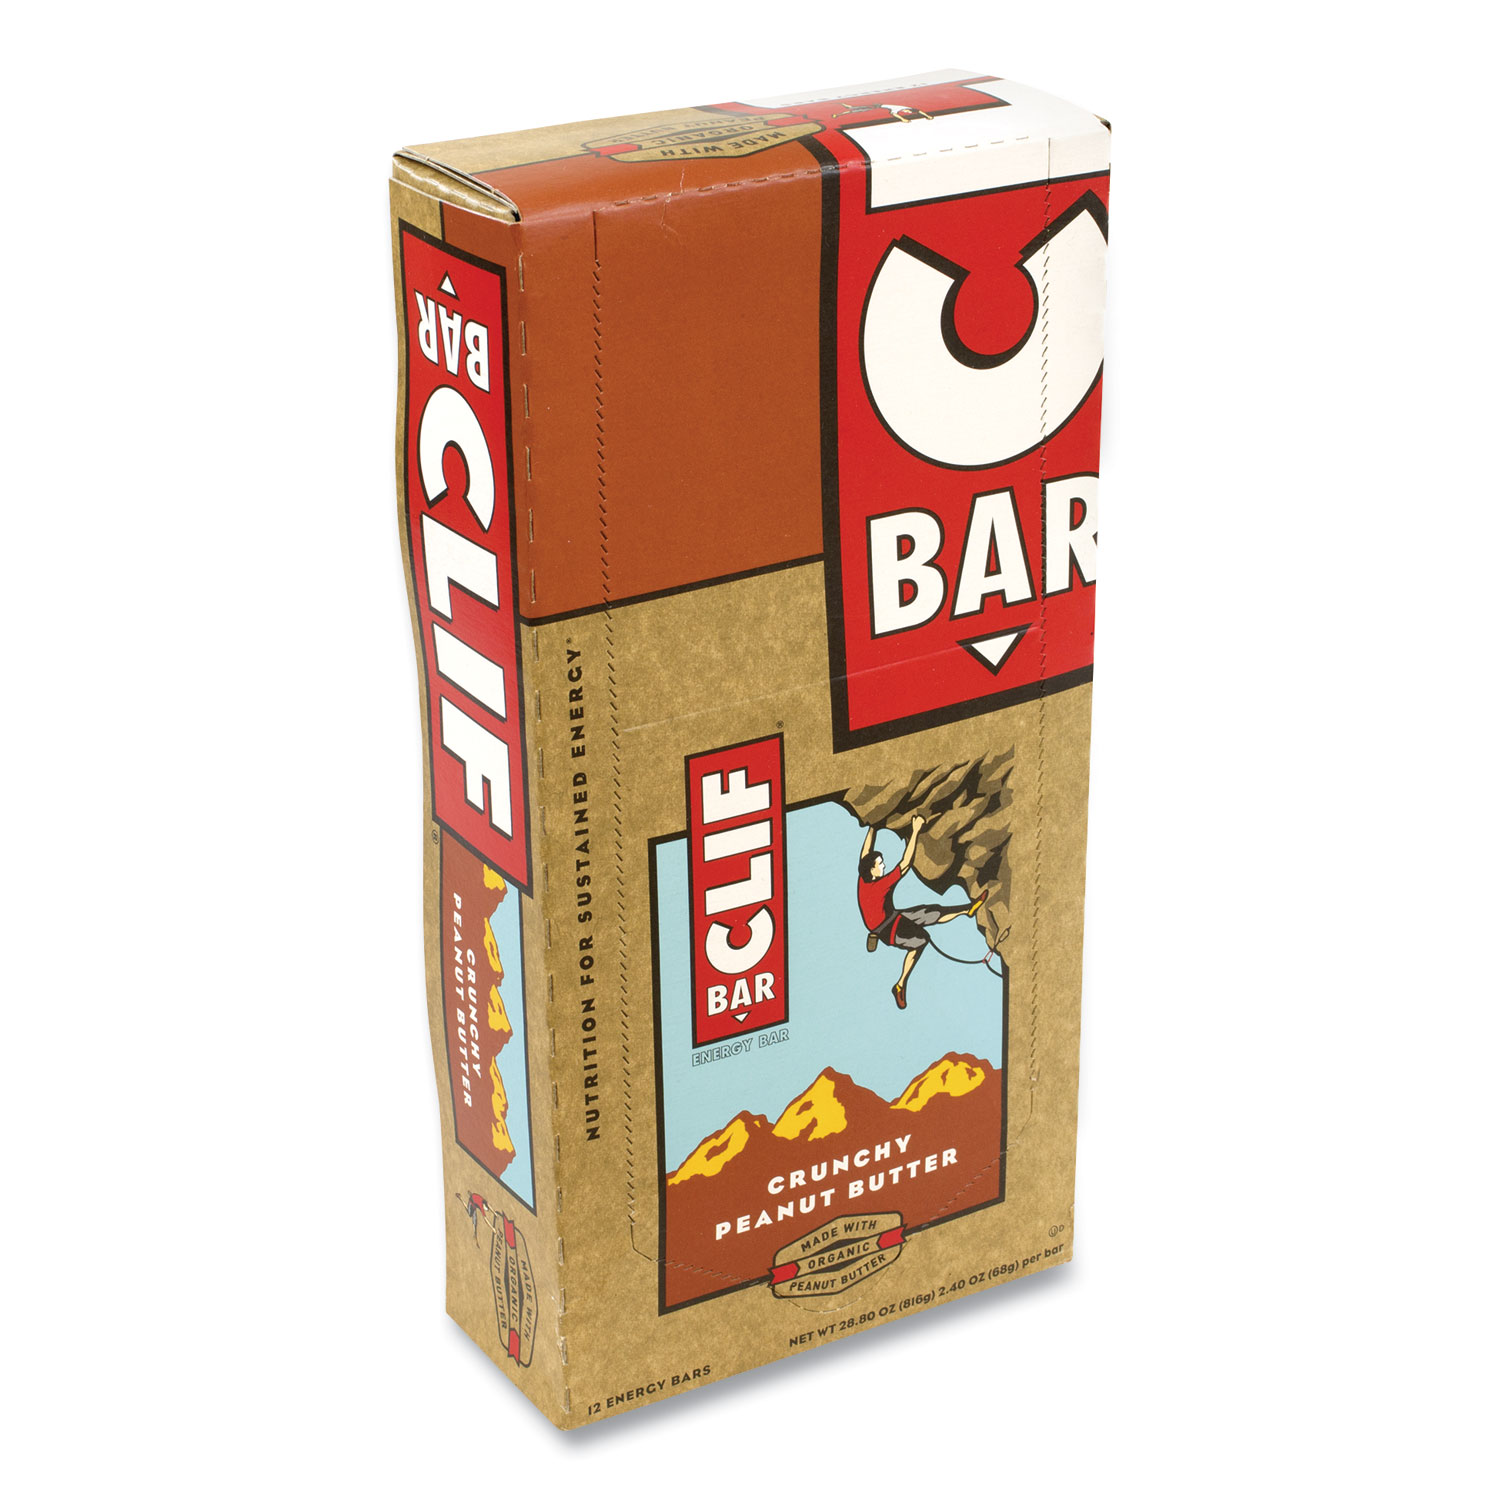 CLIF® Bar Energy Bar, Crunchy Peanut Butter, 2.4 oz, 12/Box, Free Delivery in 1-4 Business Days